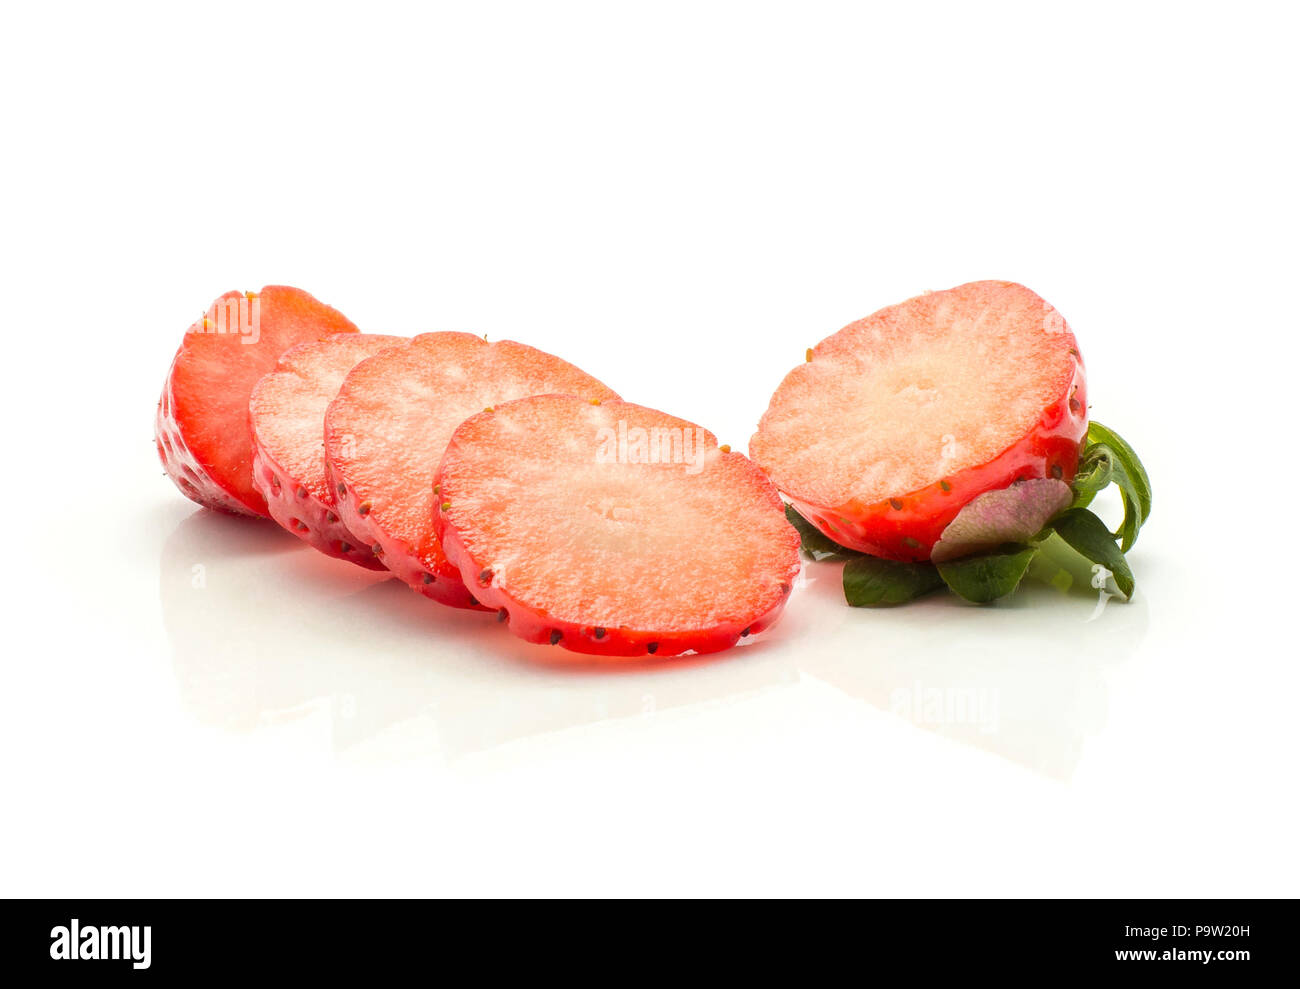 Sliced garden strawberry isolated on white background fresh cut five slices Stock Photo